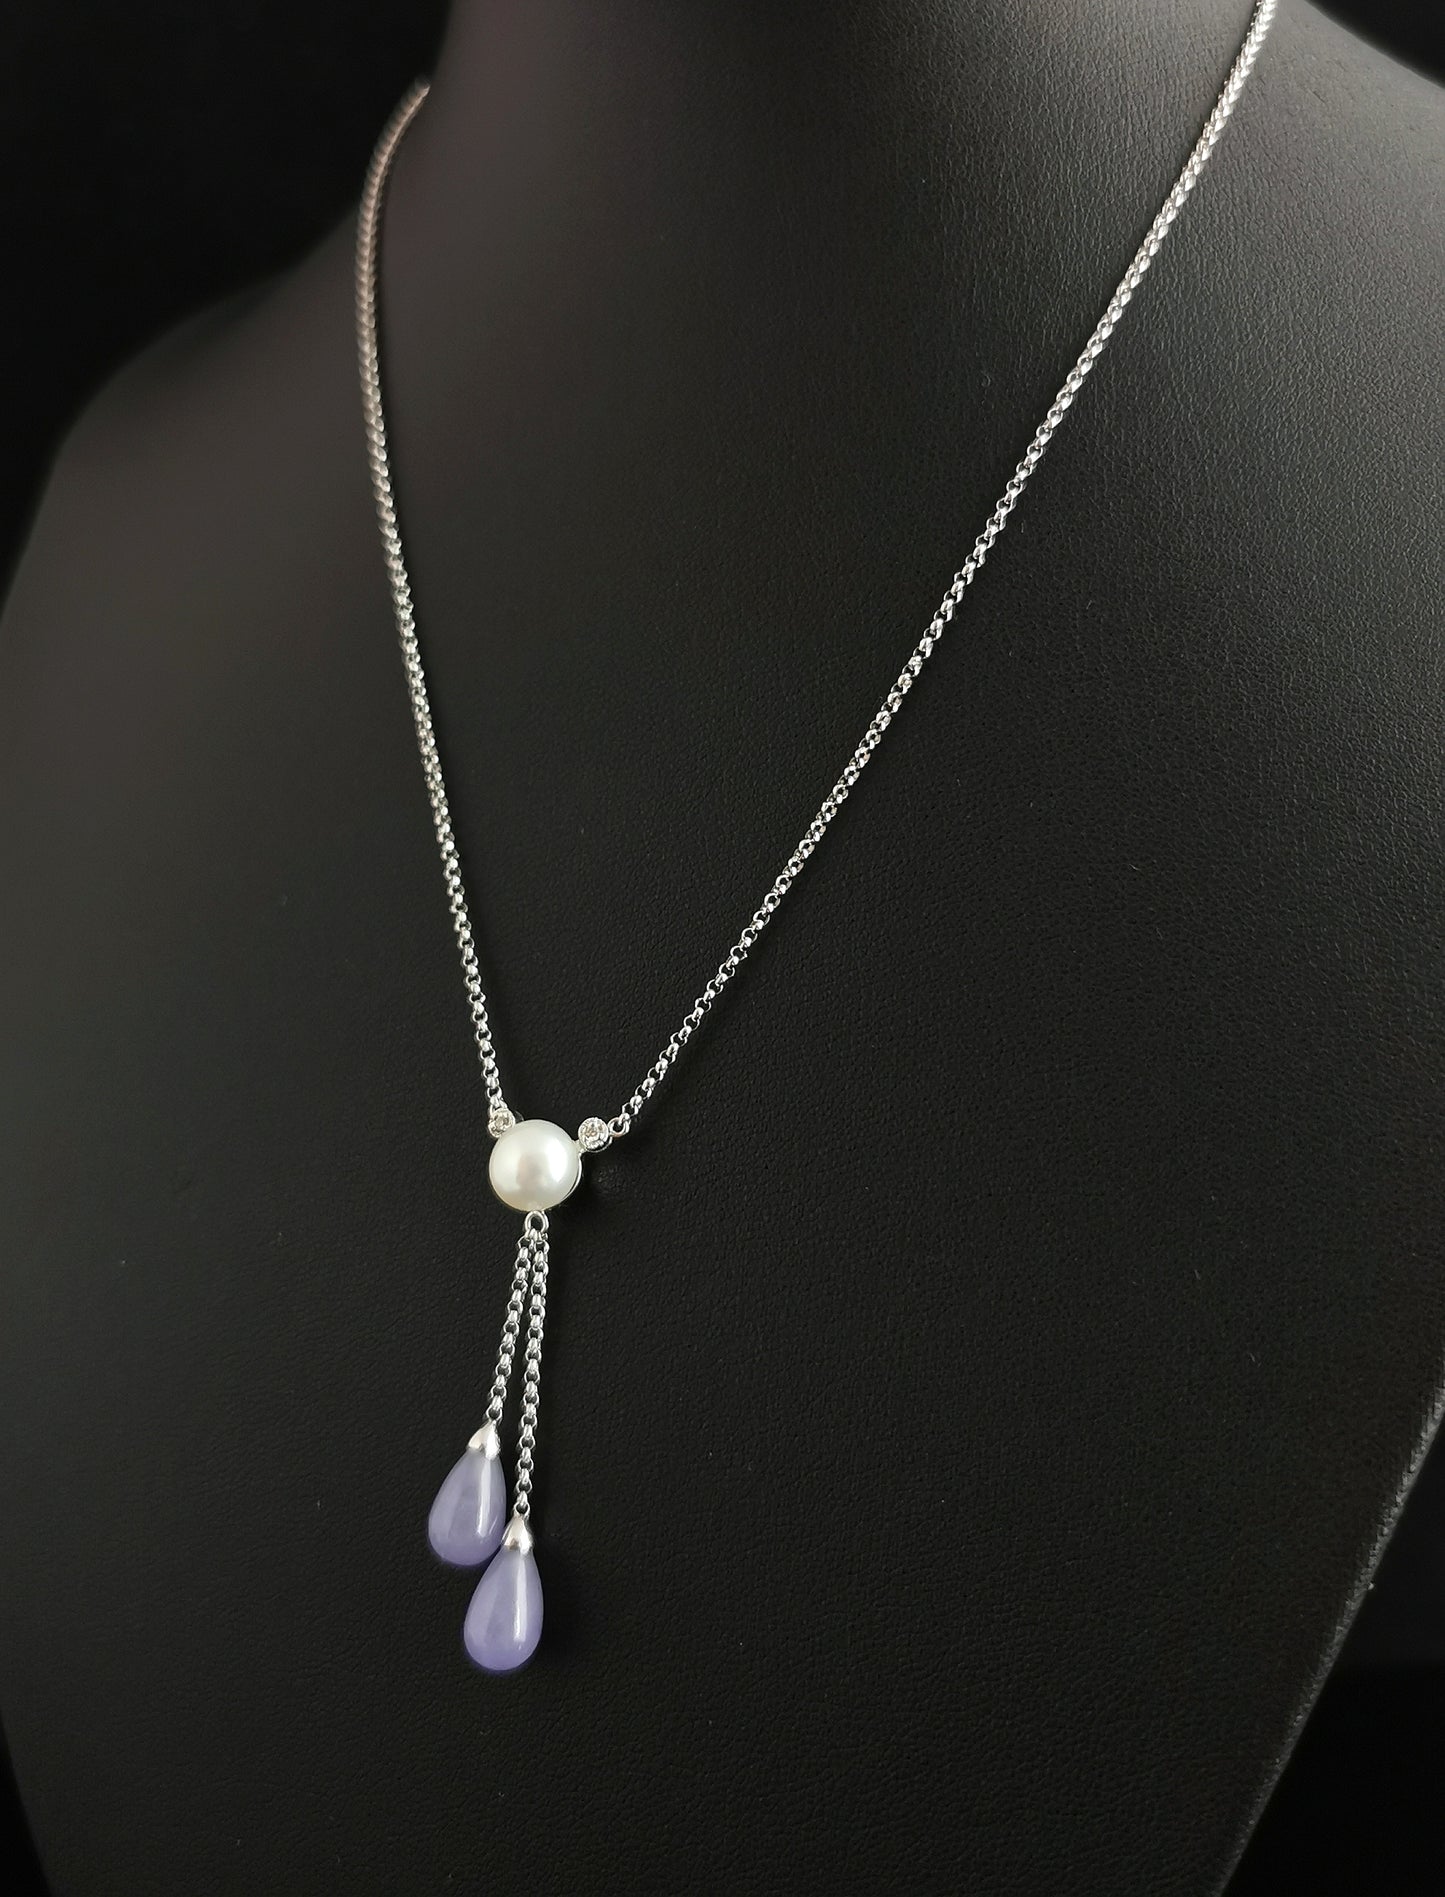 Vintage Art Deco style lariat necklace, Diamond, Pearl and Lavender Jade, 14ct white gold